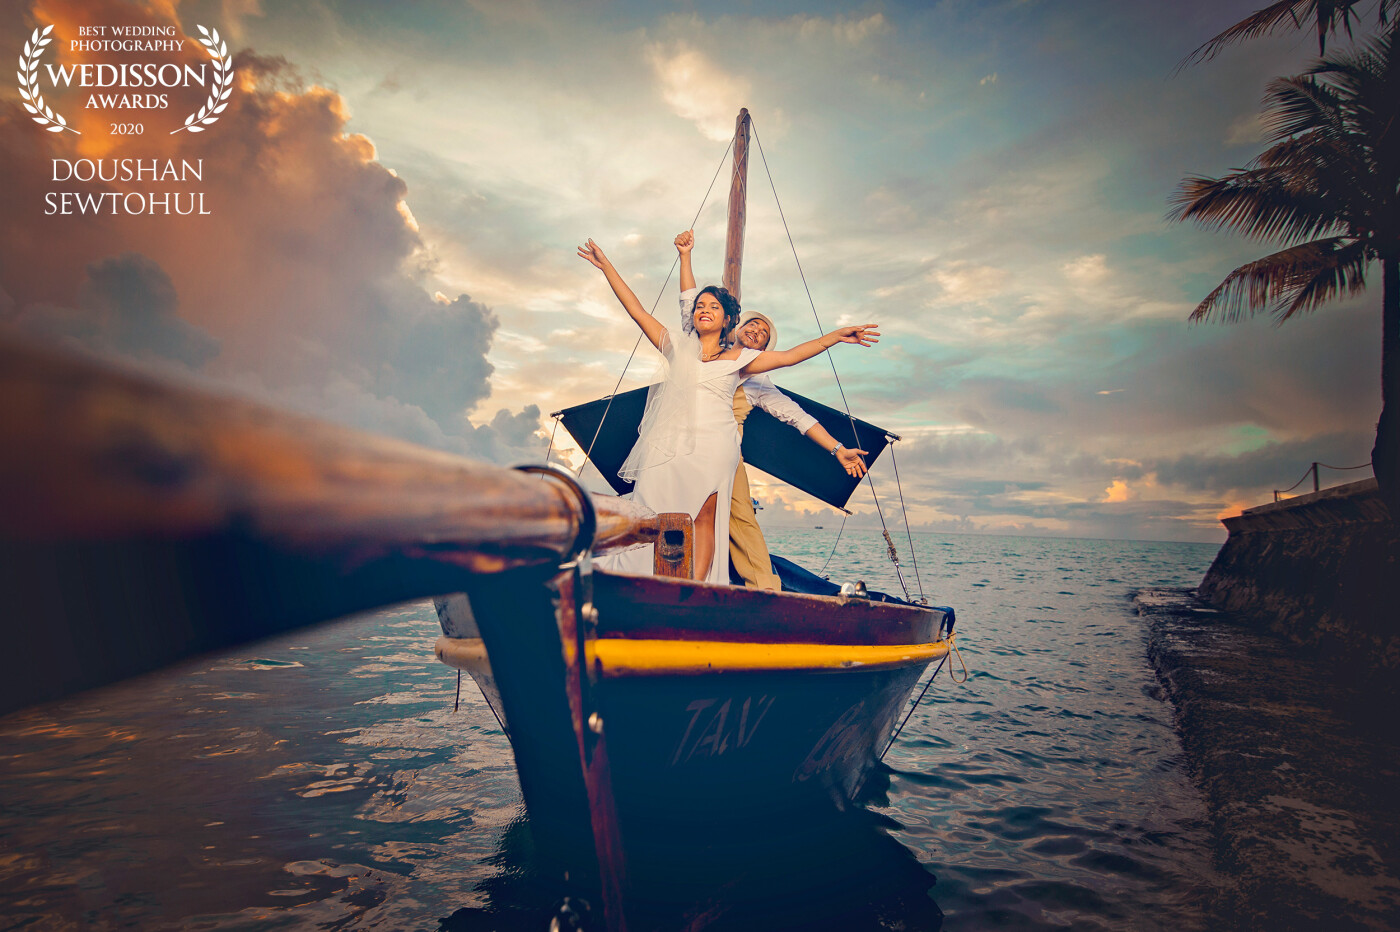 What A beautiful memory! the most waited moment. The grand entrance of the bride and groom. It was a destination wedding in the paradise island of Mauritius. The perspective of the boat inspired me to take this shot through that angle. Very difficult though with the moving boat.<br />
#Mauritius #Doushanarts<br />
www.doushanarts.com